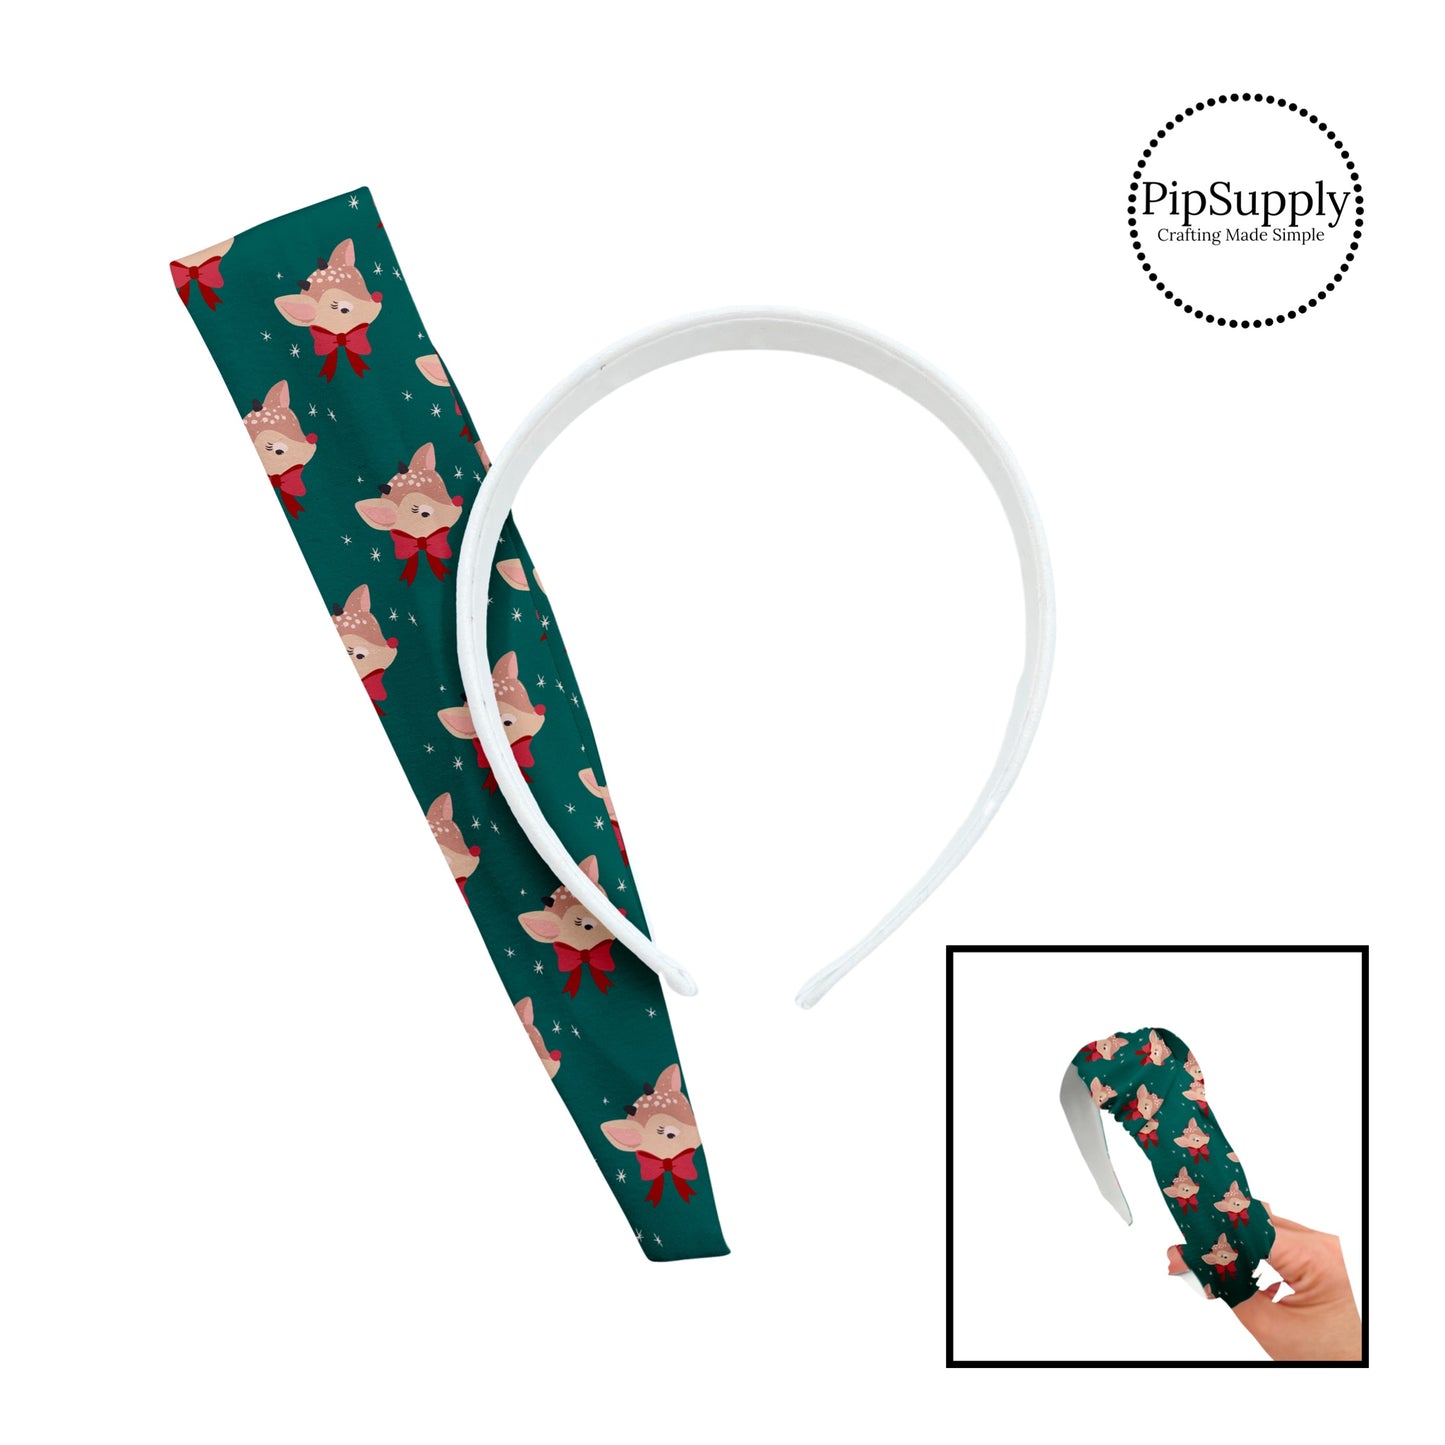 These holiday pattern themed teal headband kits are easy to assemble and come with everything you need to make your own knotted headband. These fun Christmas kits include a custom printed and sewn fabric strip and a coordinating velvet headband. The headband kits features reindeers with red bows on teal.